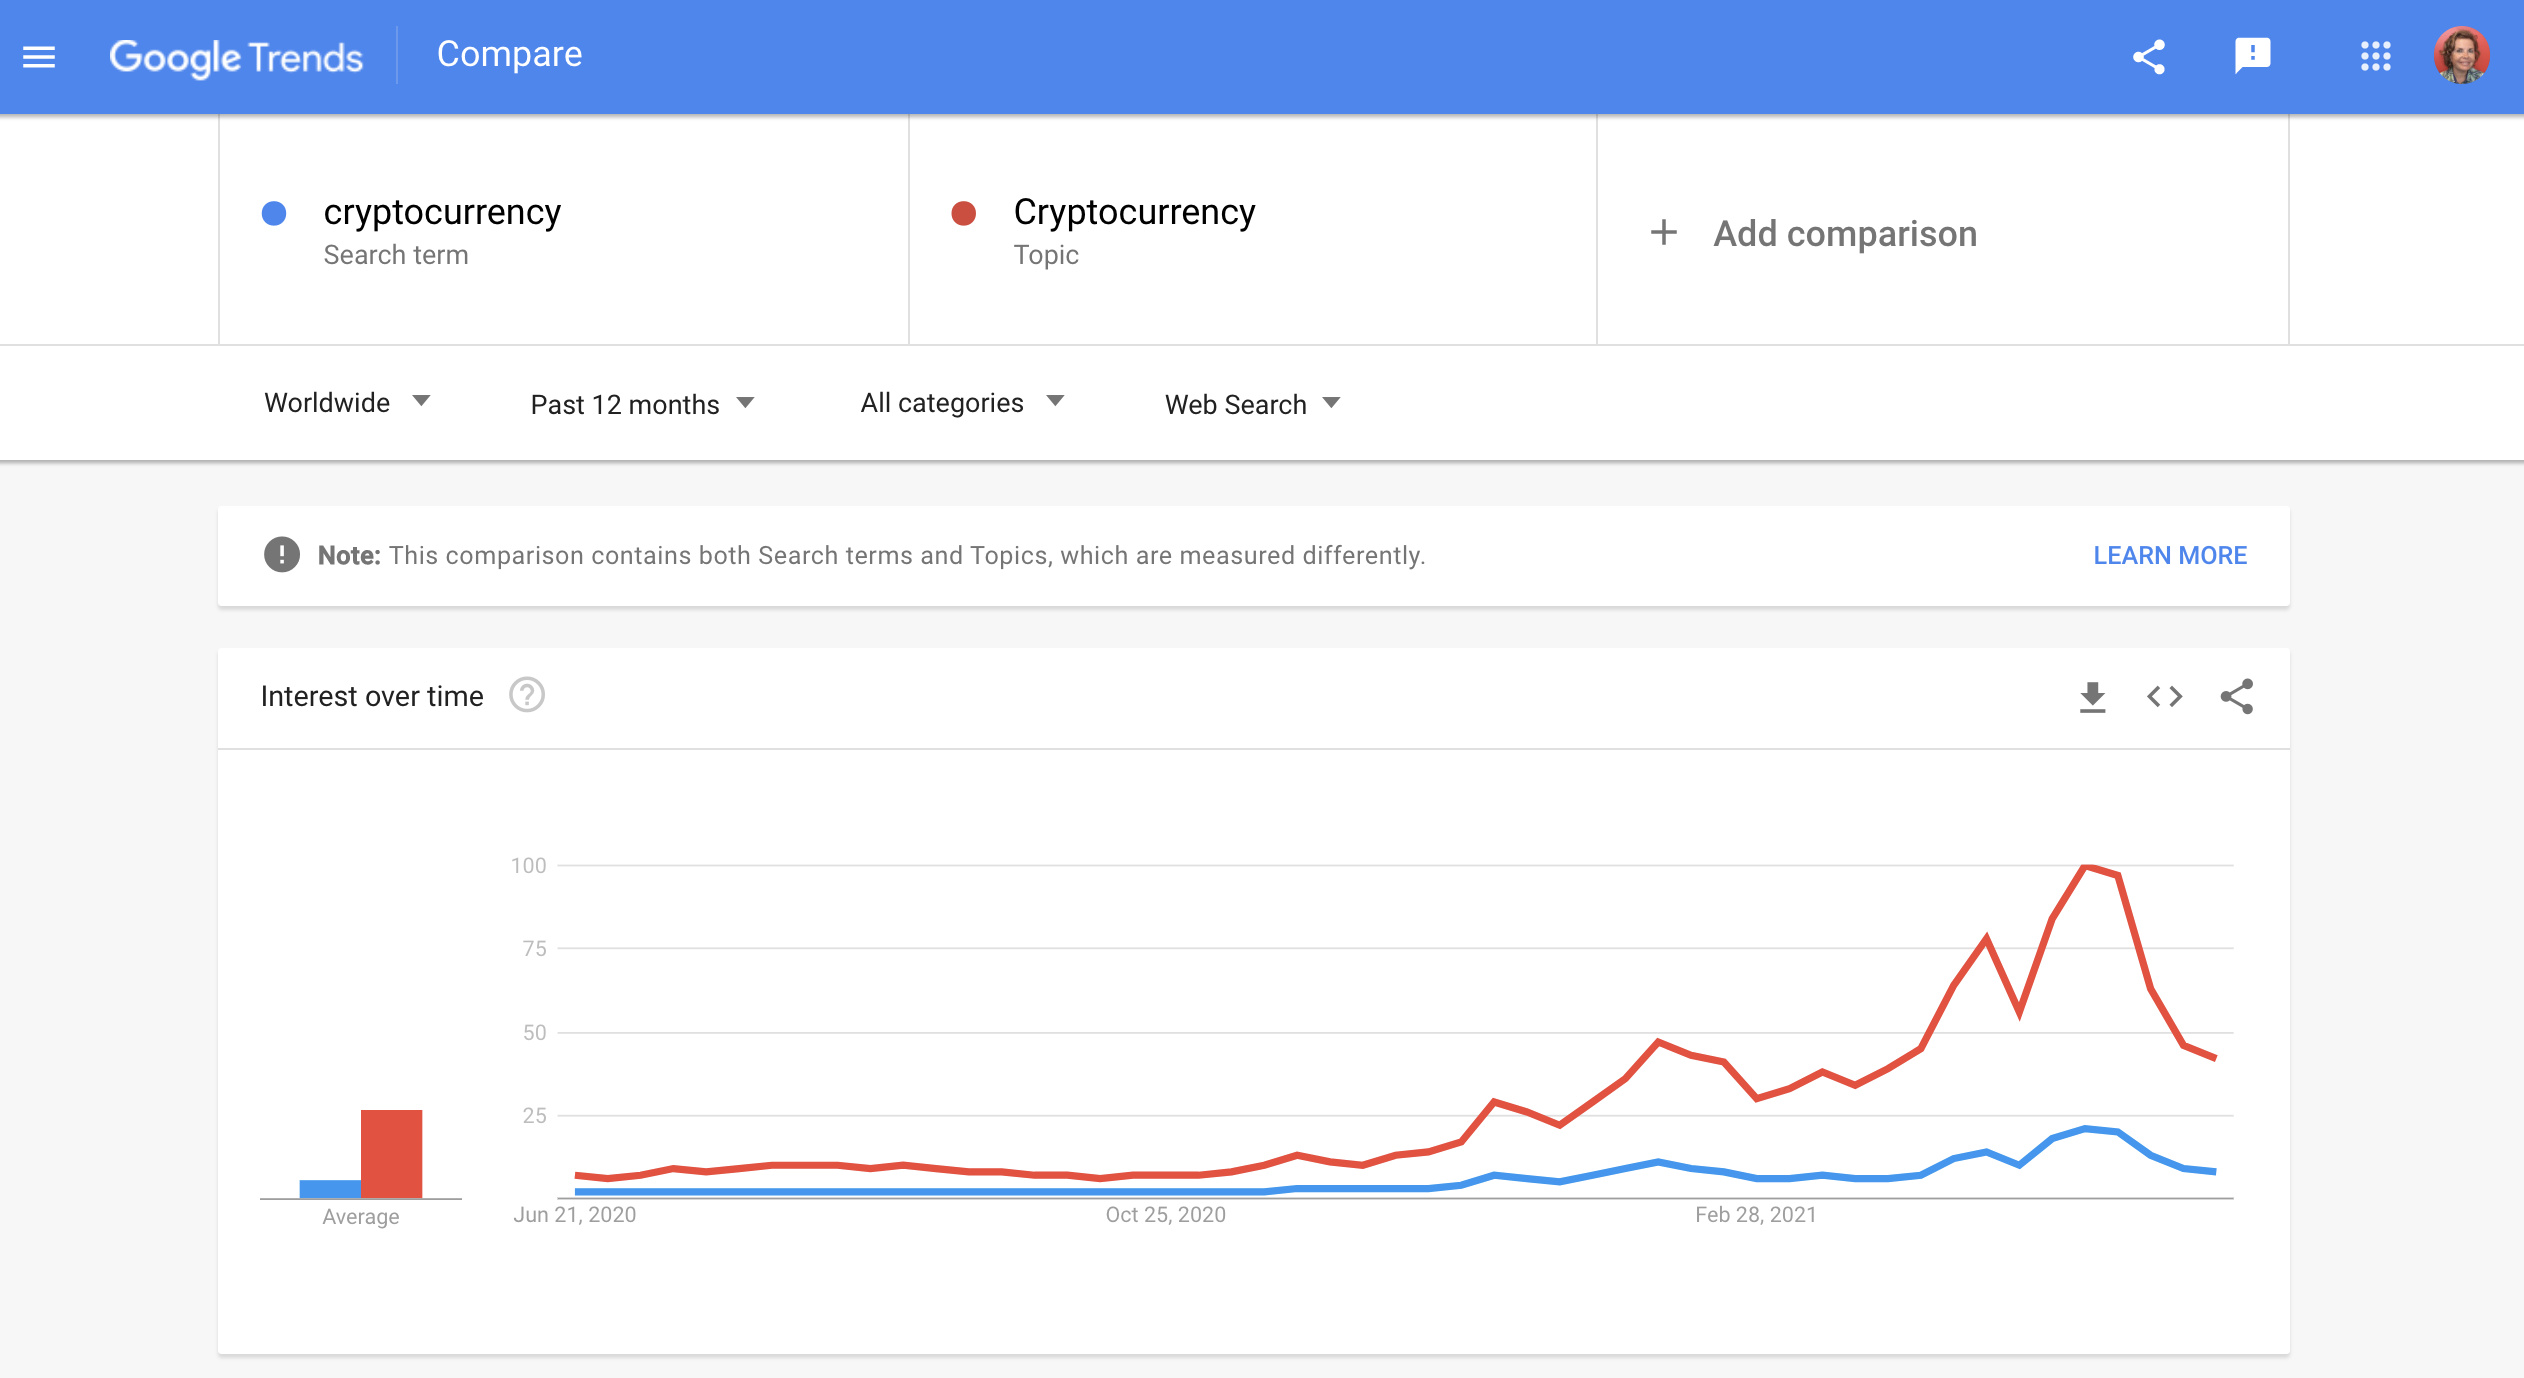 Cryptocurrency topic and search trend on Google Trends